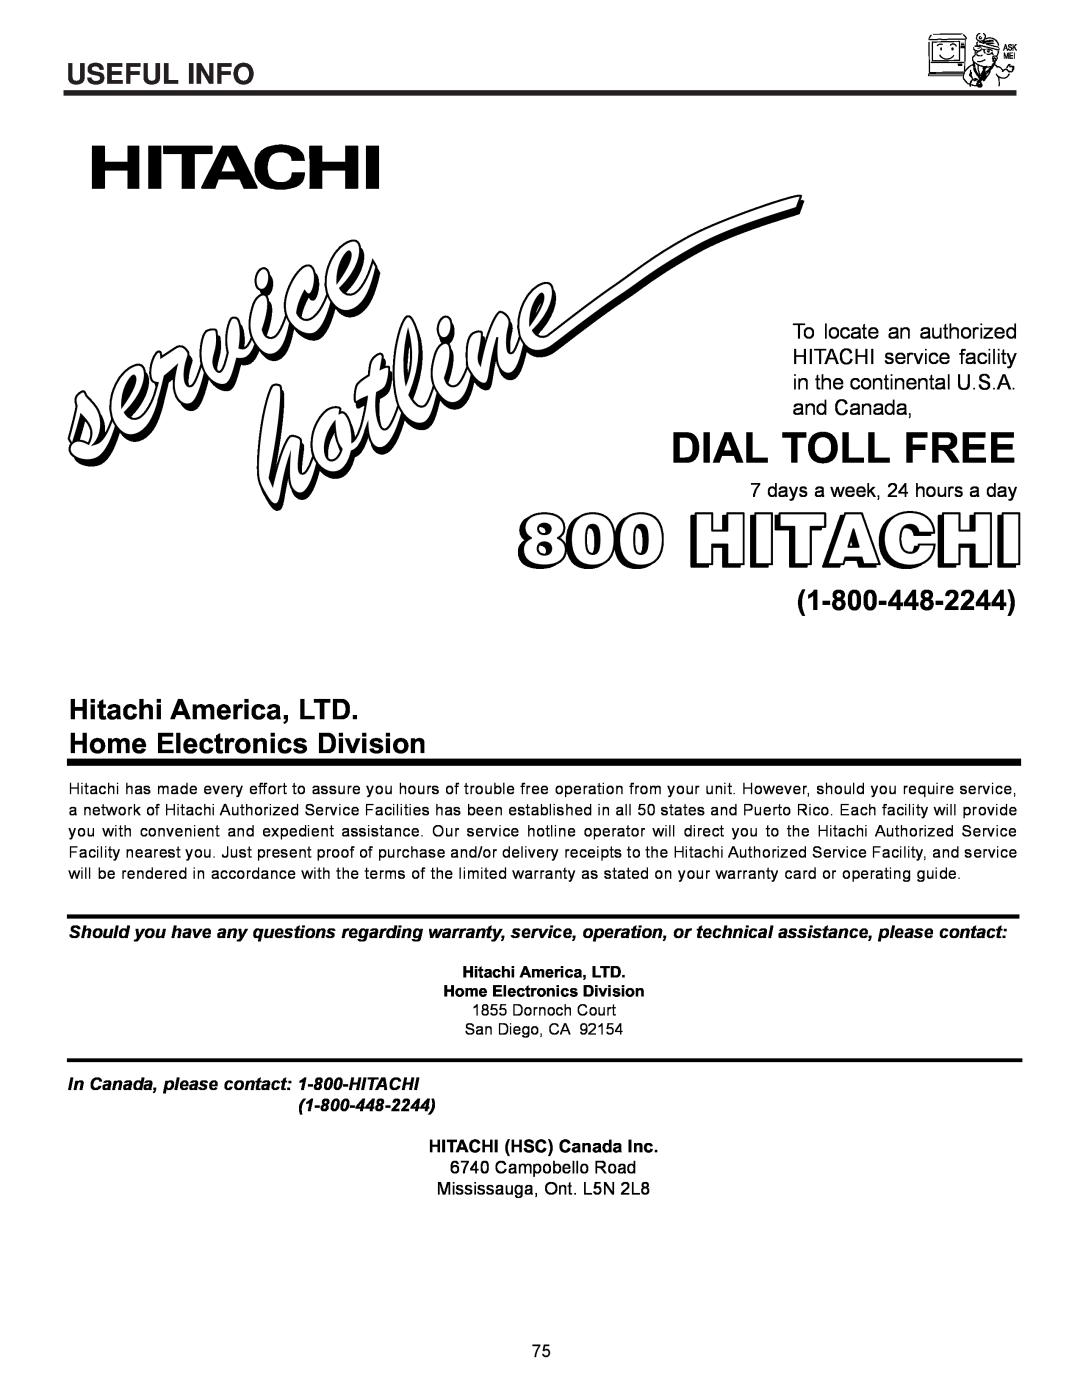 Hitachi 61UWX10B Home Electronics Division, Hitachi, Dial Toll Free, Useful Info, days a week, 24 hours a day 